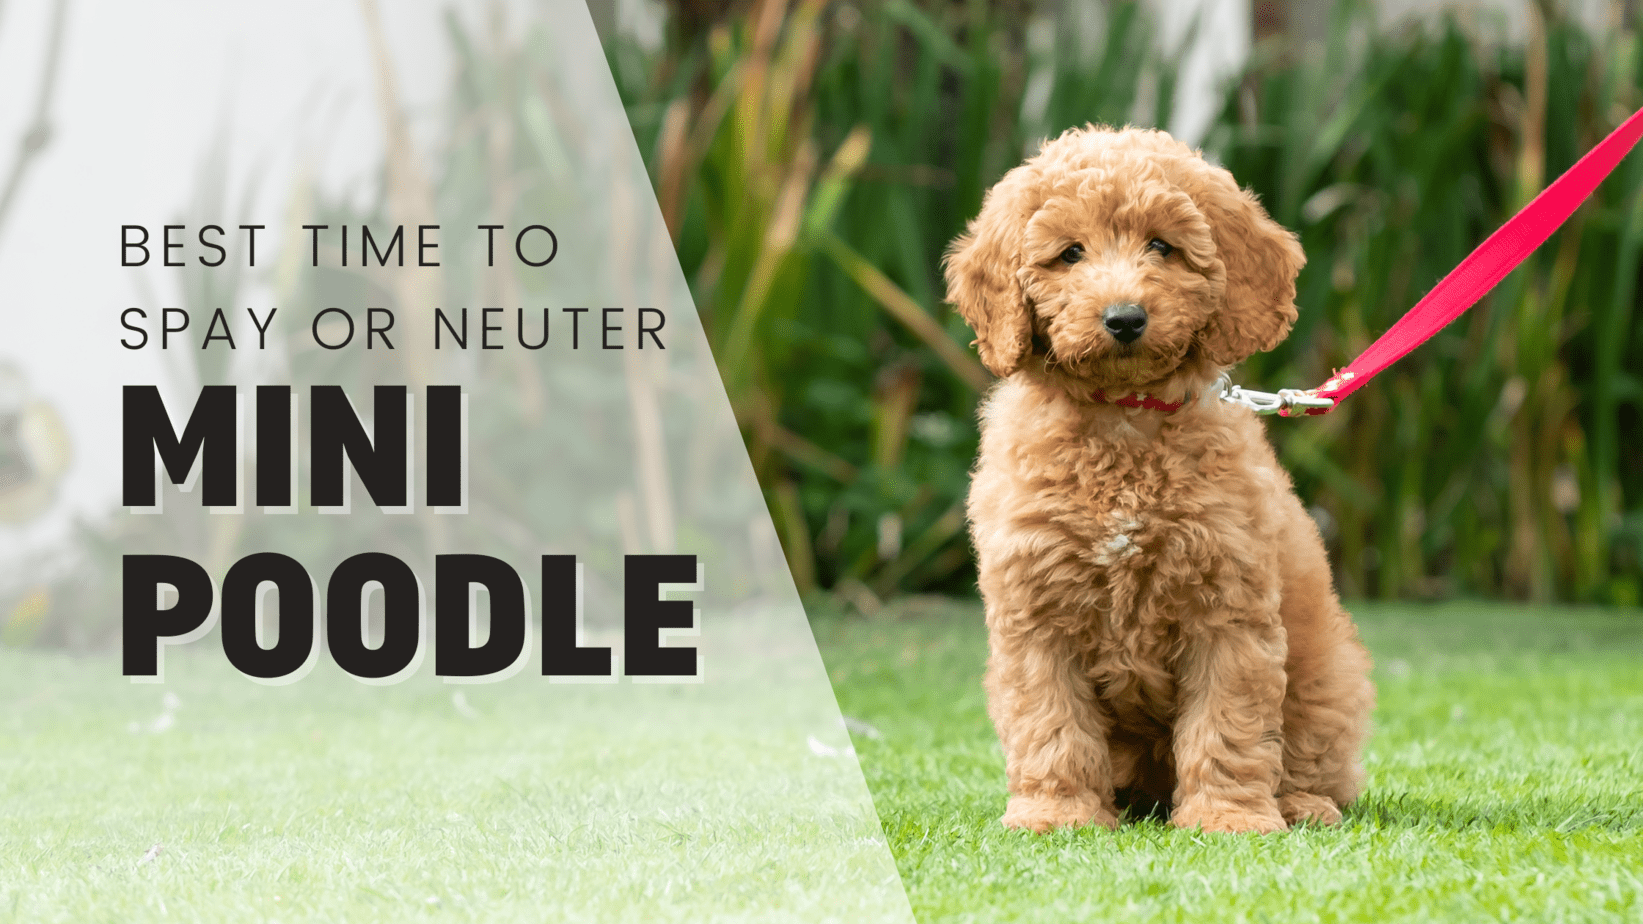 When Is The Best Time To Spay Or Neuter My Miniature Poodle?